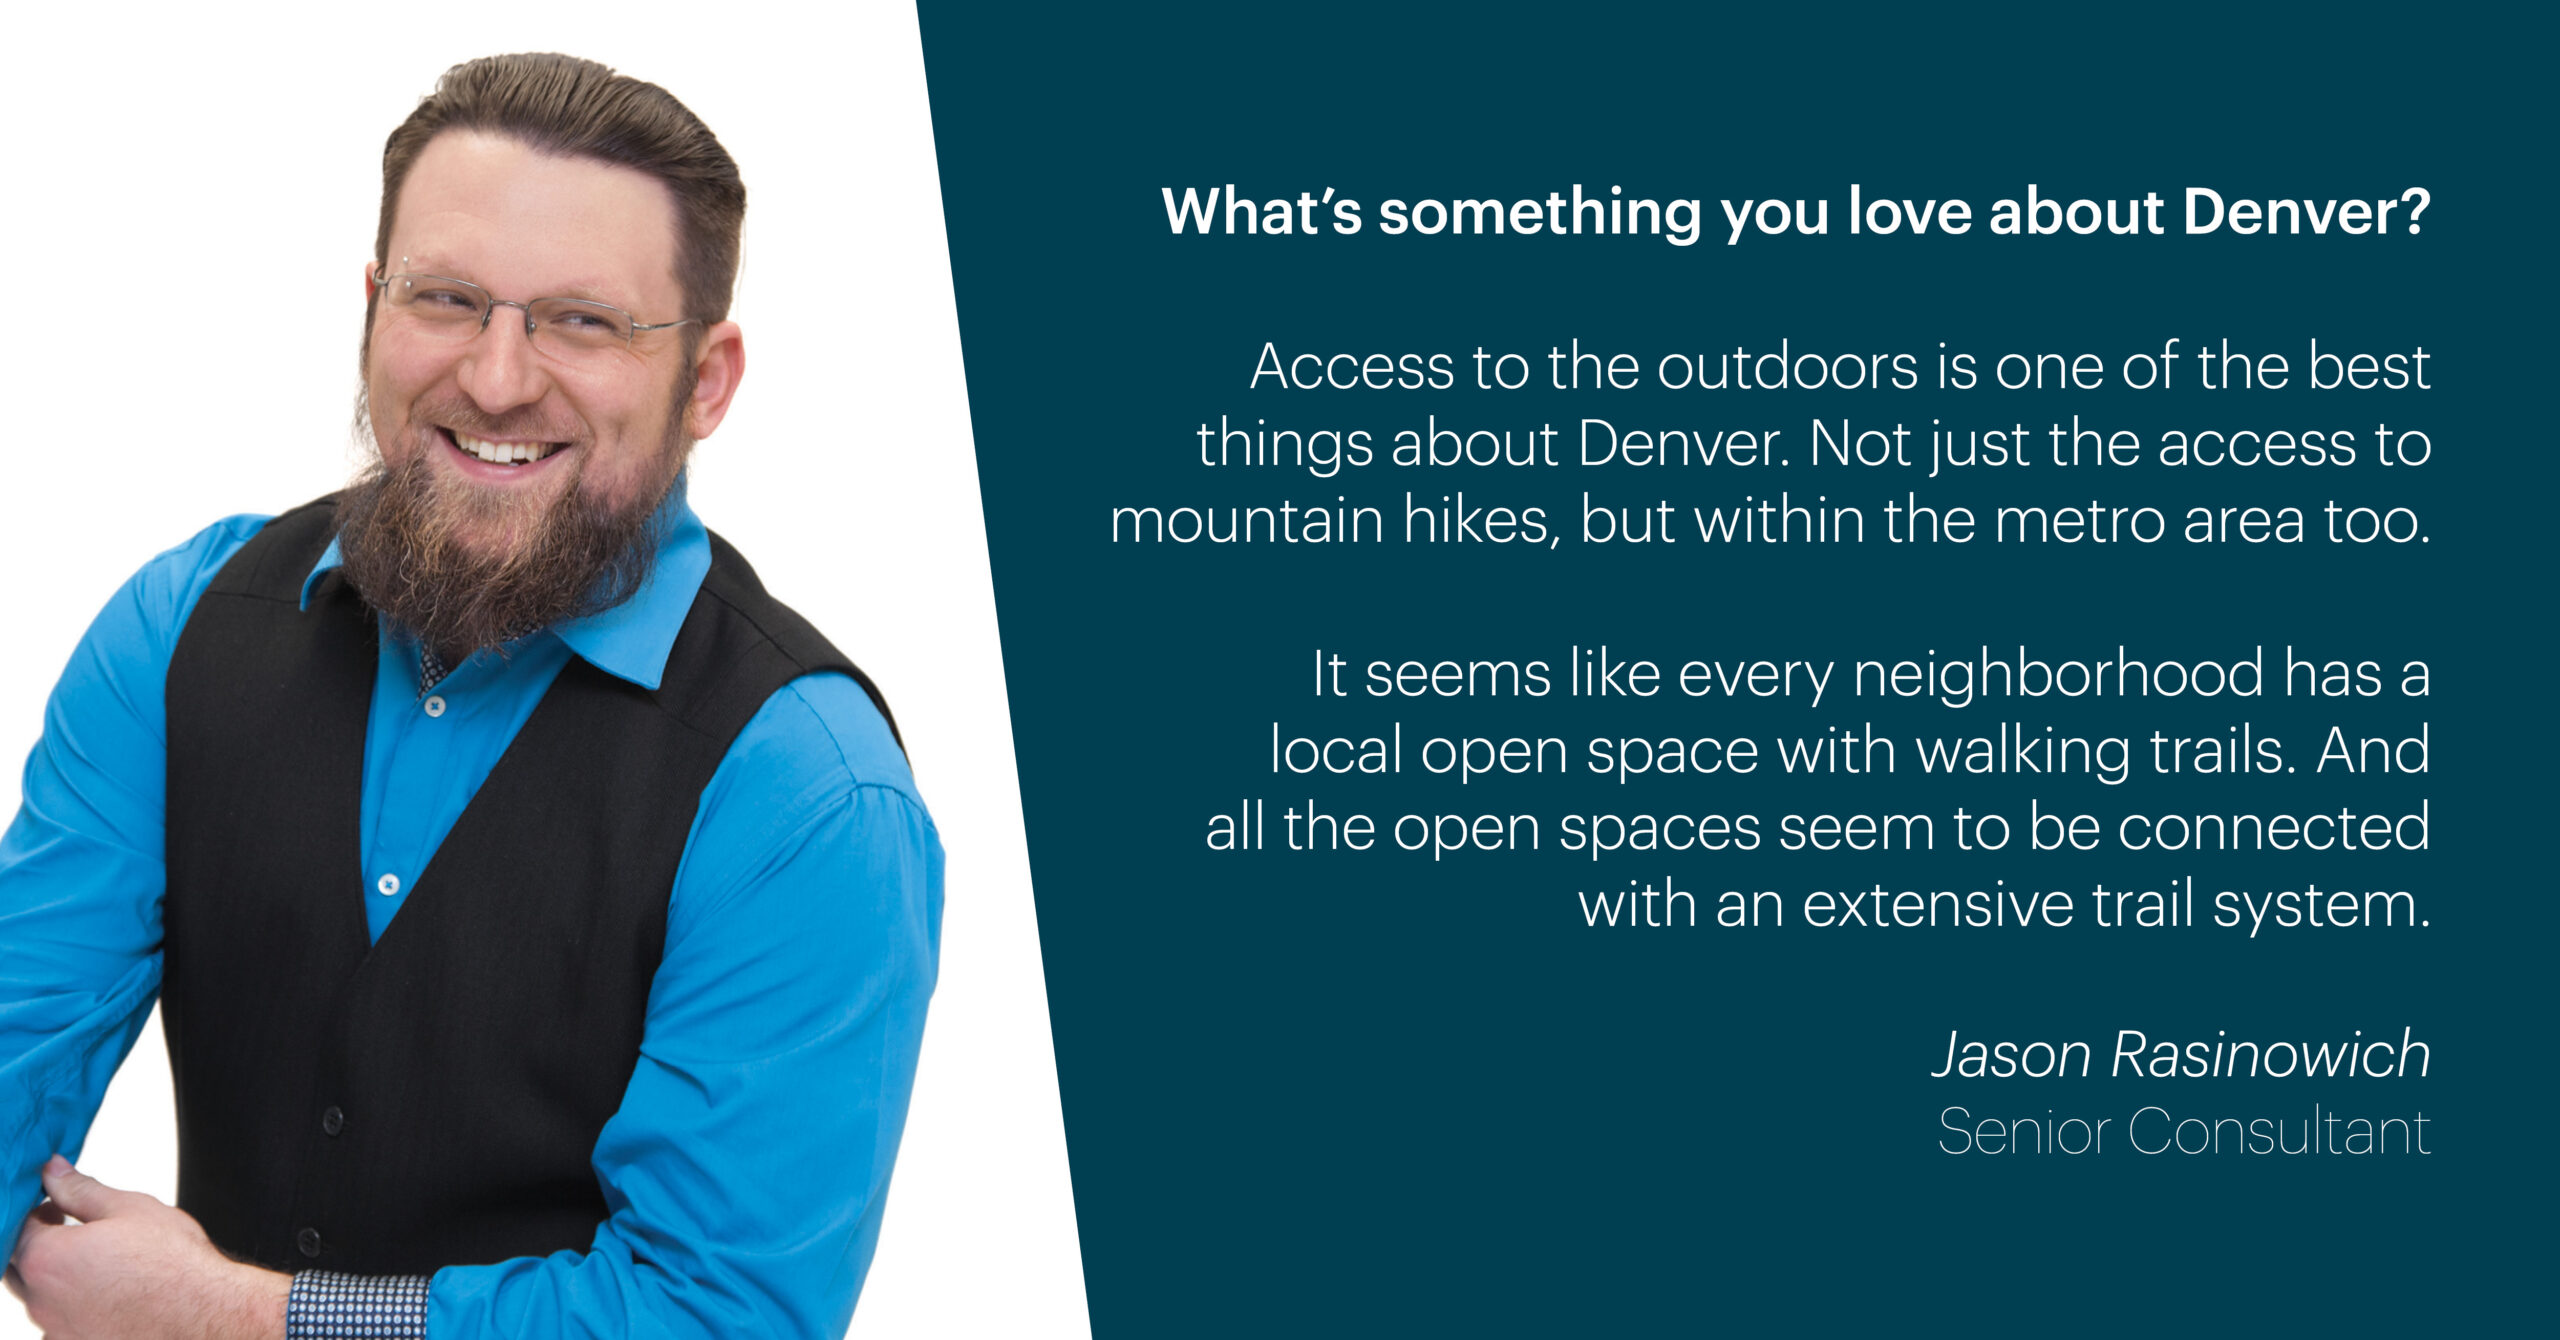 image of Jason Rasinowich next to text explaining what he loves about Denver